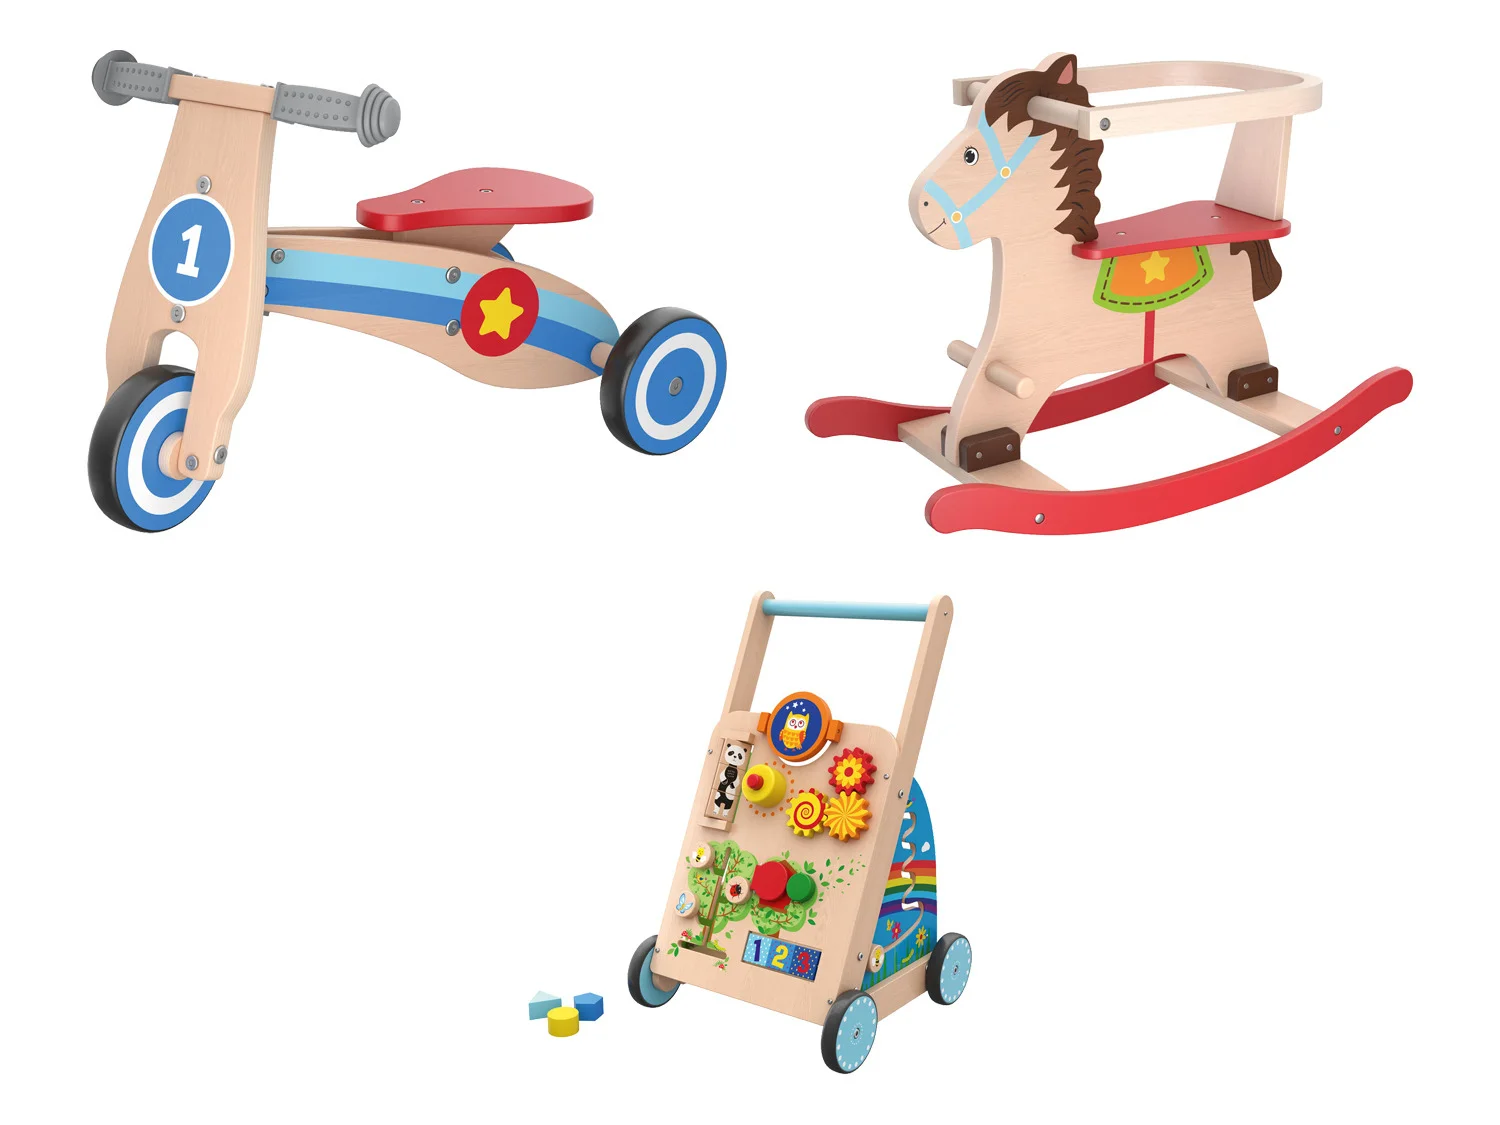 Playtive active toy, made of real wood - Wooden toys factory/BSCI/FSC